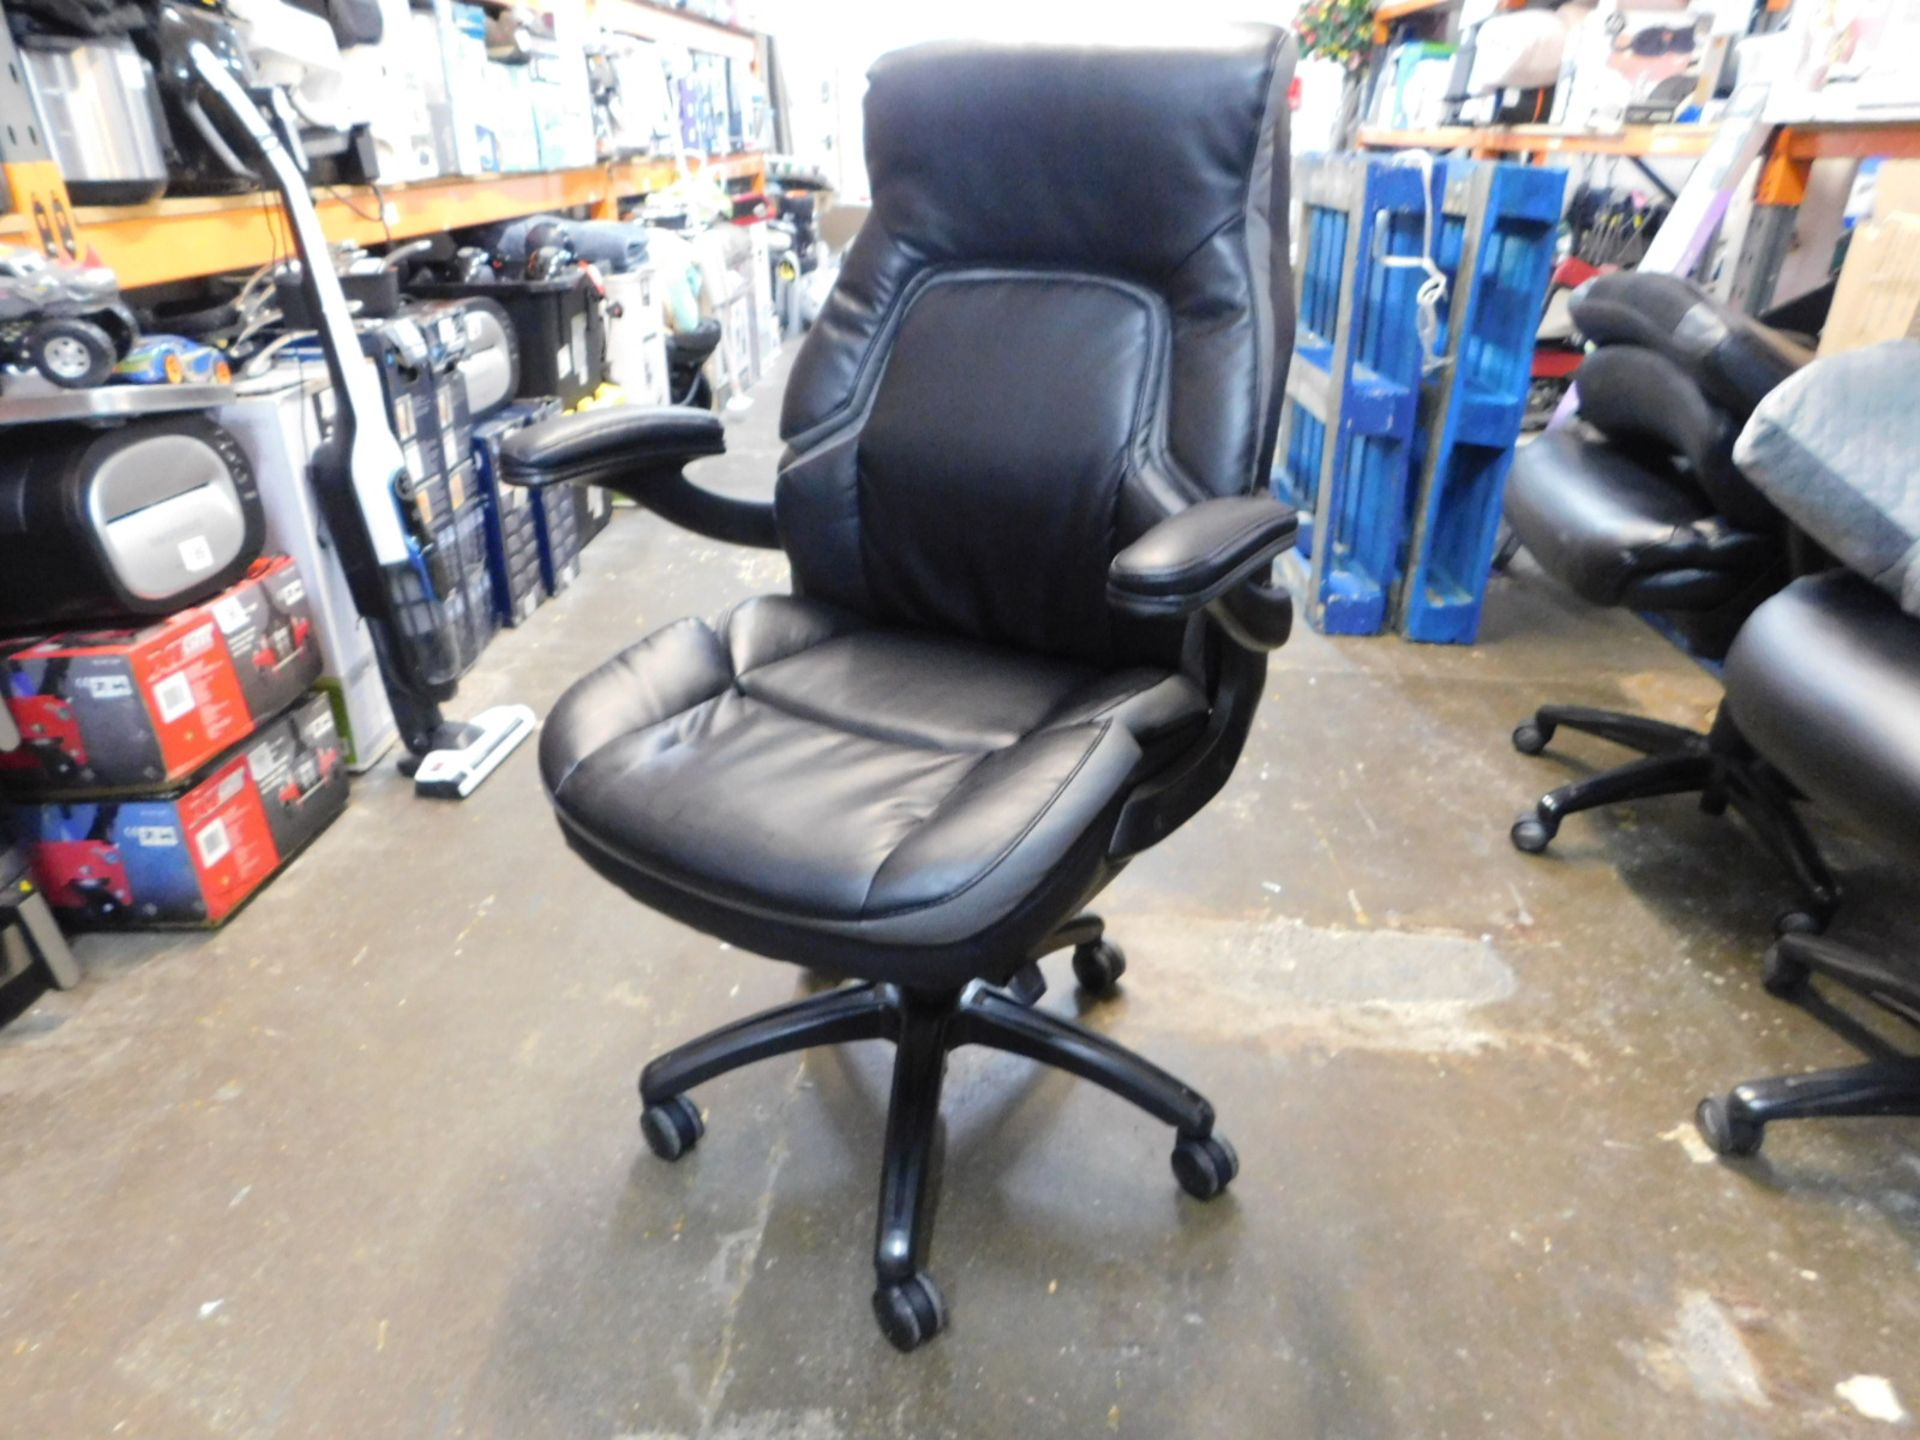 1 DORMEO BLACK BONDED LEATHER GAS LIFT MANAGERS CHAIR RRP Â£149.99